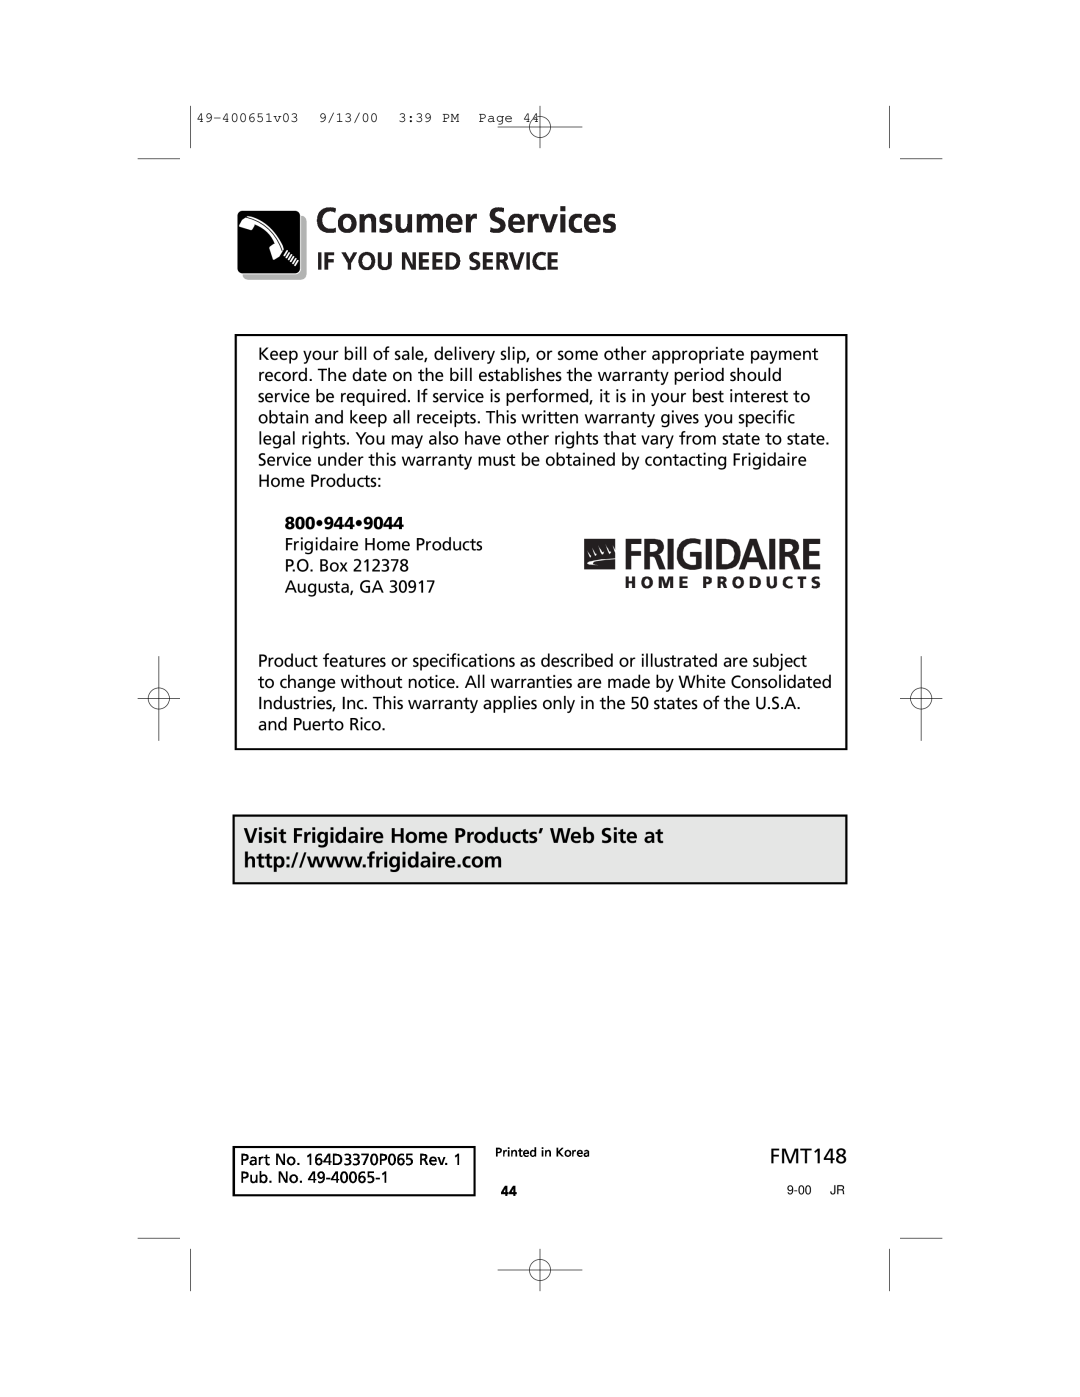 Frigidaire FMT148 warranty If You Need Service, Visit Frigidaire Home Products’ Web Site at, Consumer Services 